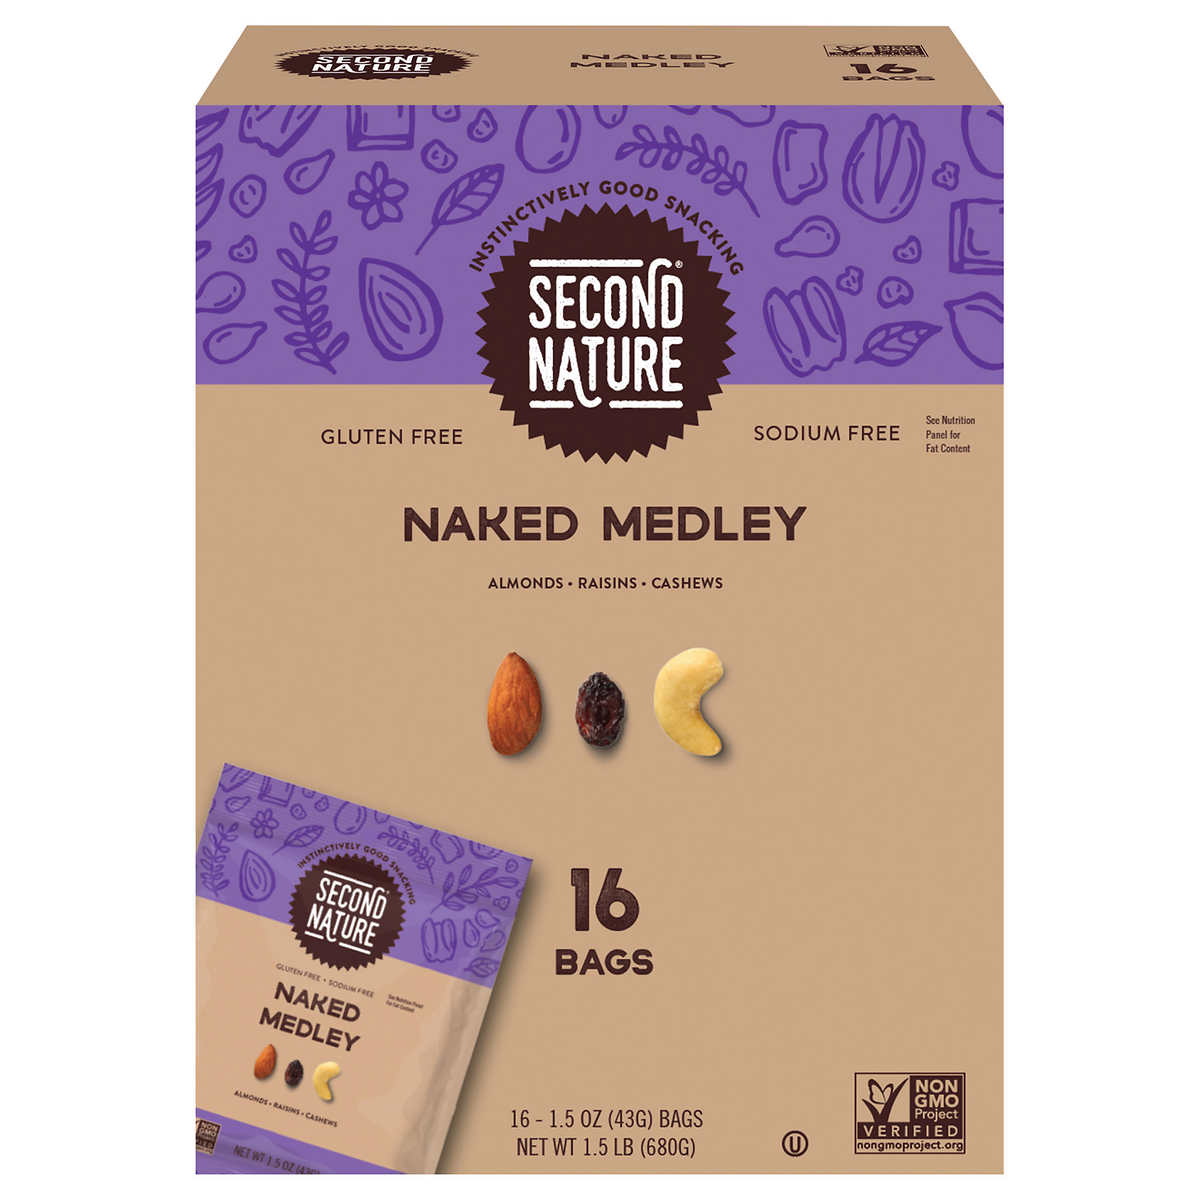 Second Trail Mix, Naked Medley, oz, 16-count | Costco